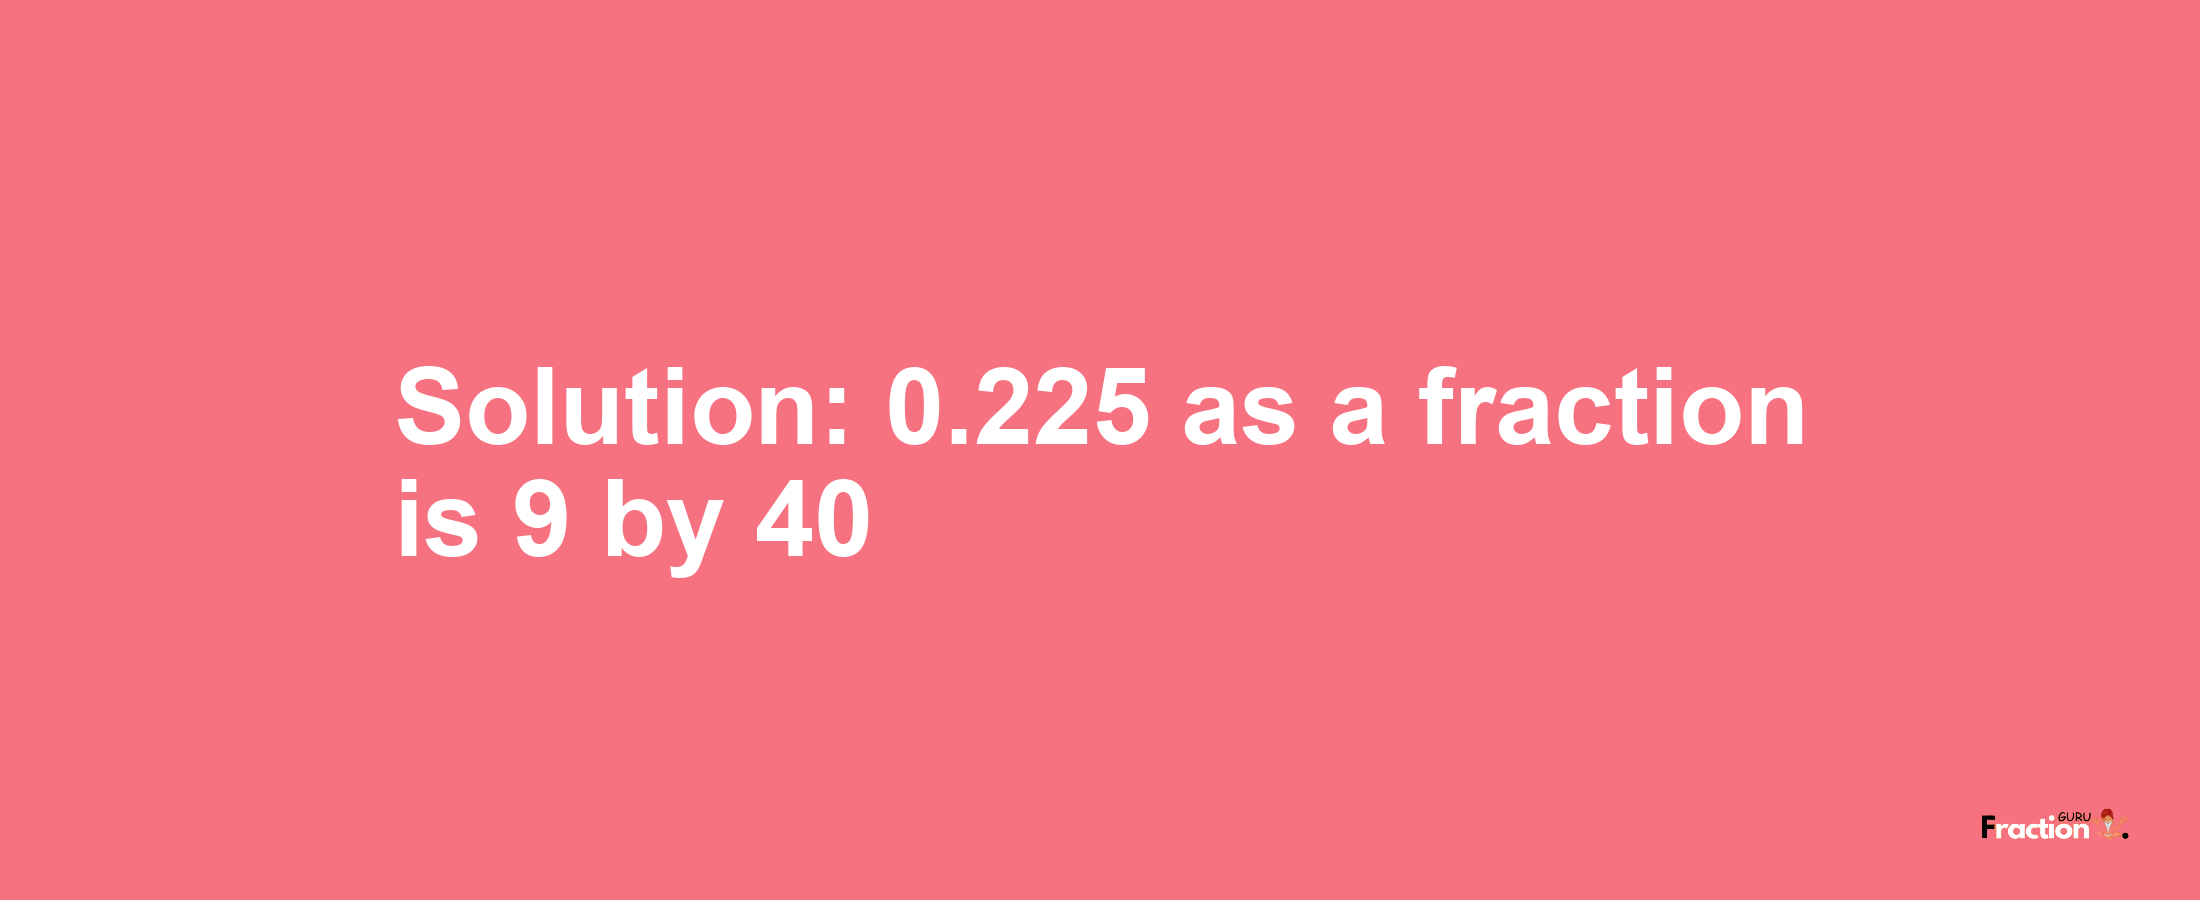 Solution:0.225 as a fraction is 9/40